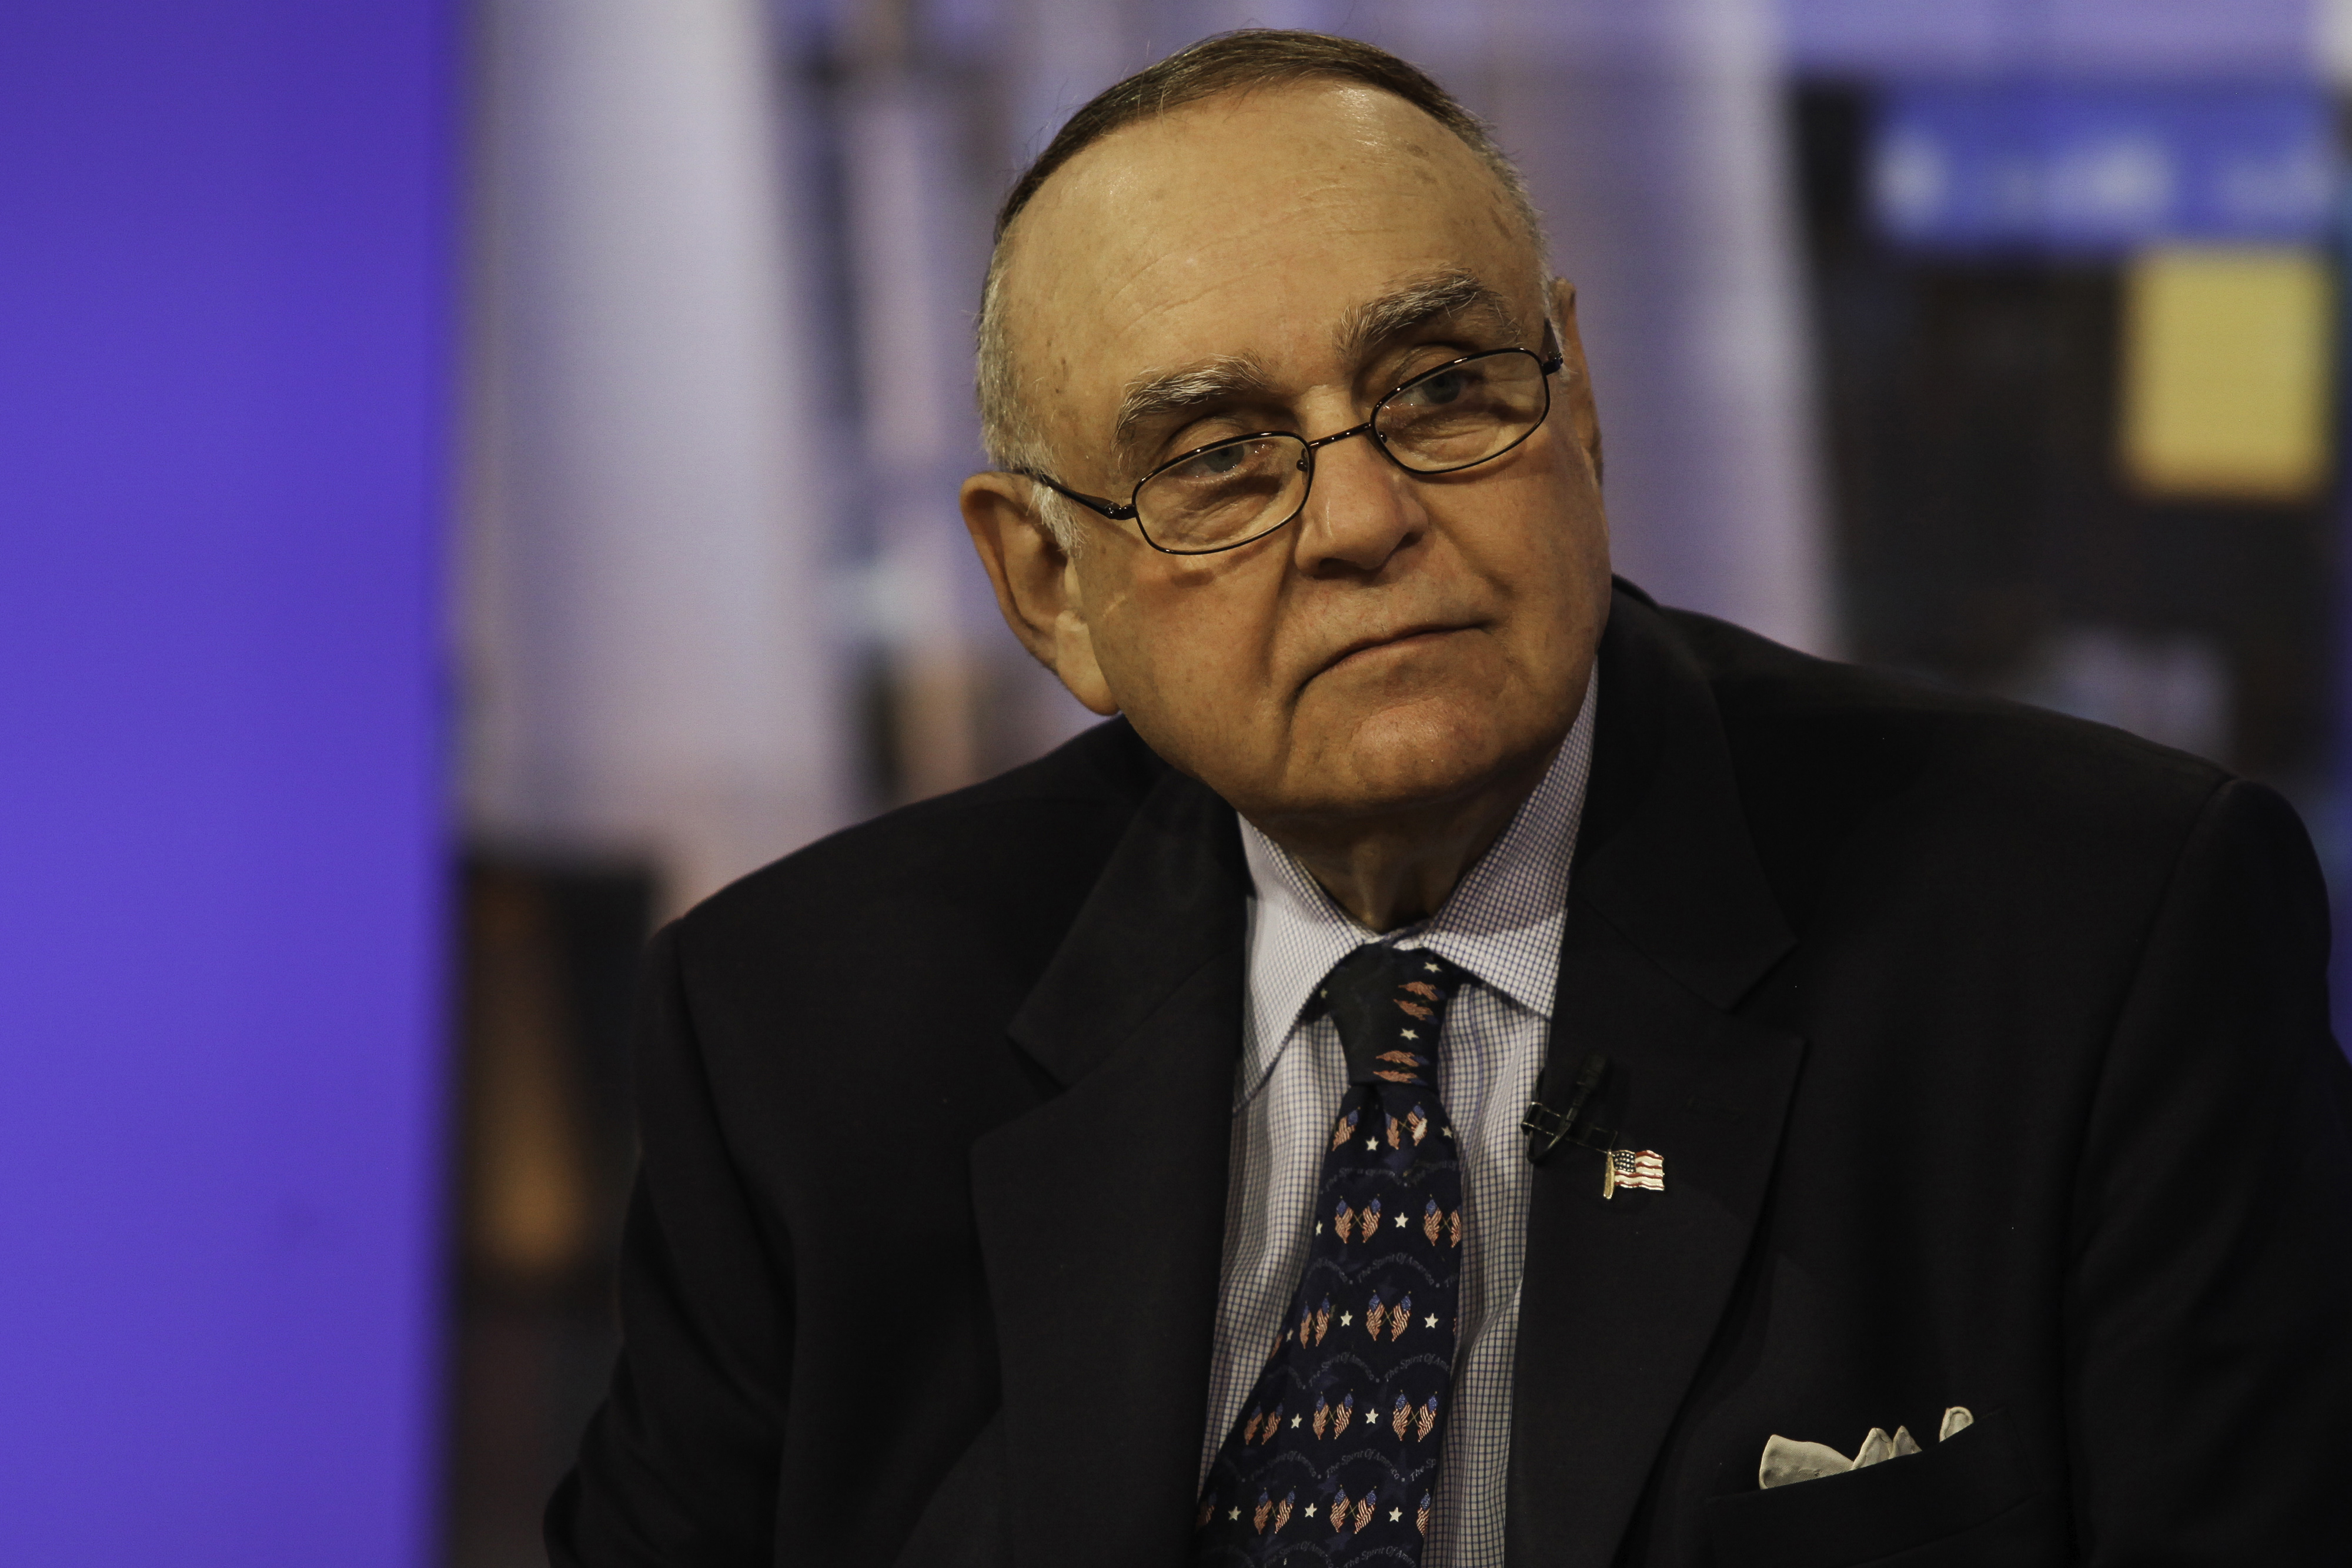 Omega Advisors Inc. Chief Executive Officer Leon Cooperman Interview